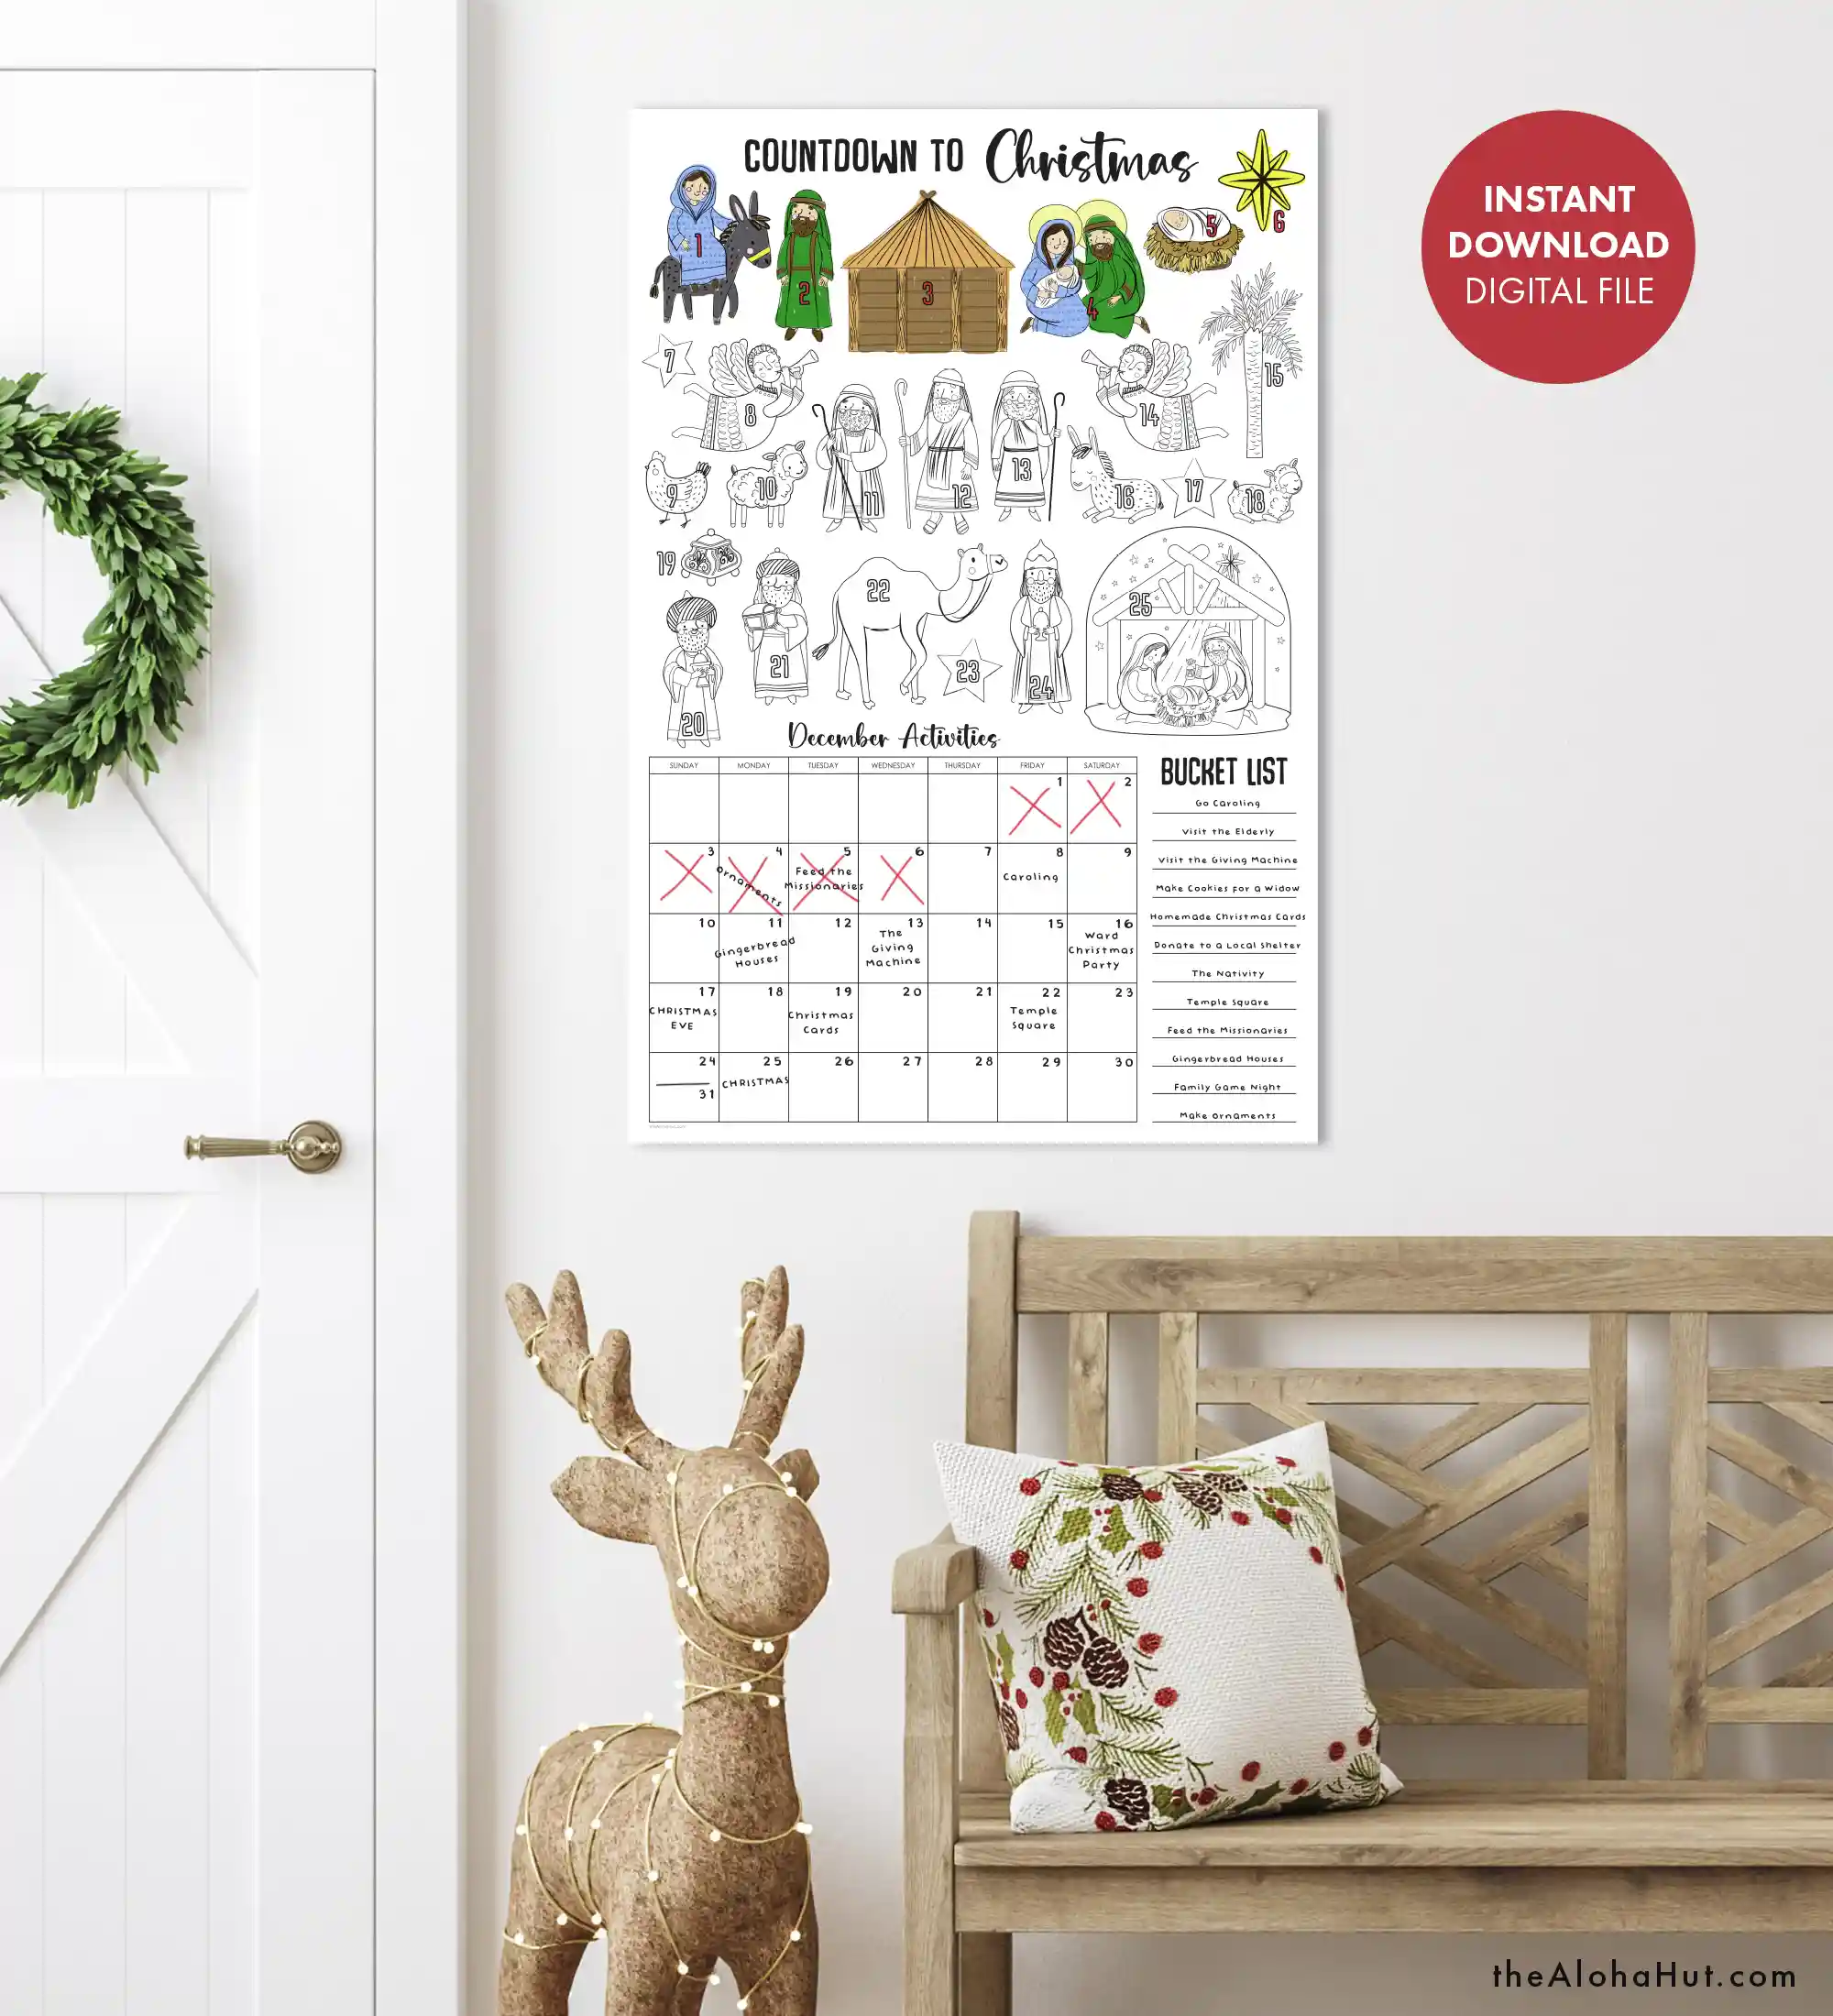 countdown to christmas coloring poster and december calendar printable to plan your decemeber bucket list activities and events.